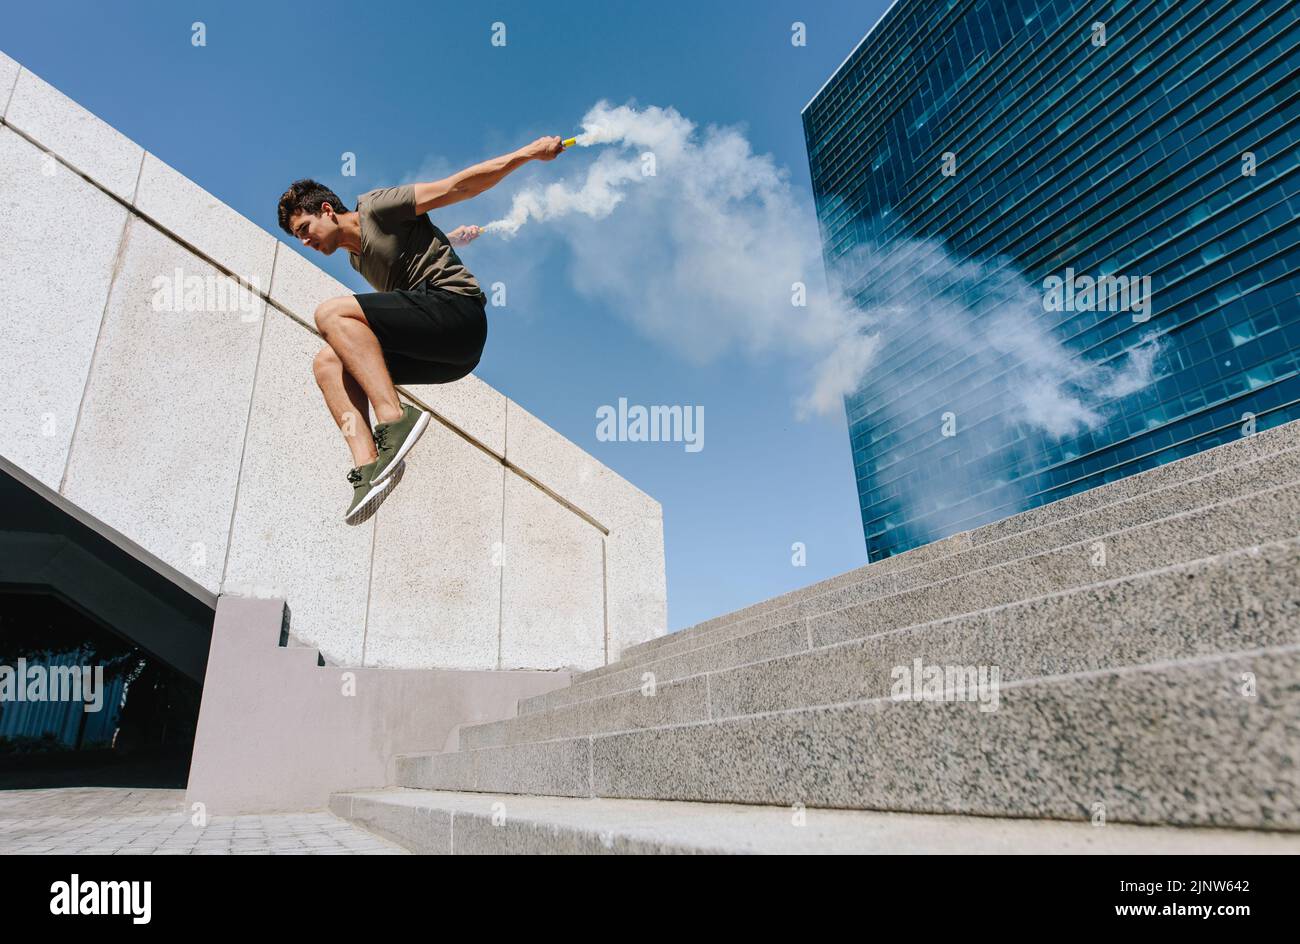 Young man jumping high over stairs outdoors with smoke grenades. Free runner jumping over some steps in urban space. Stock Photo